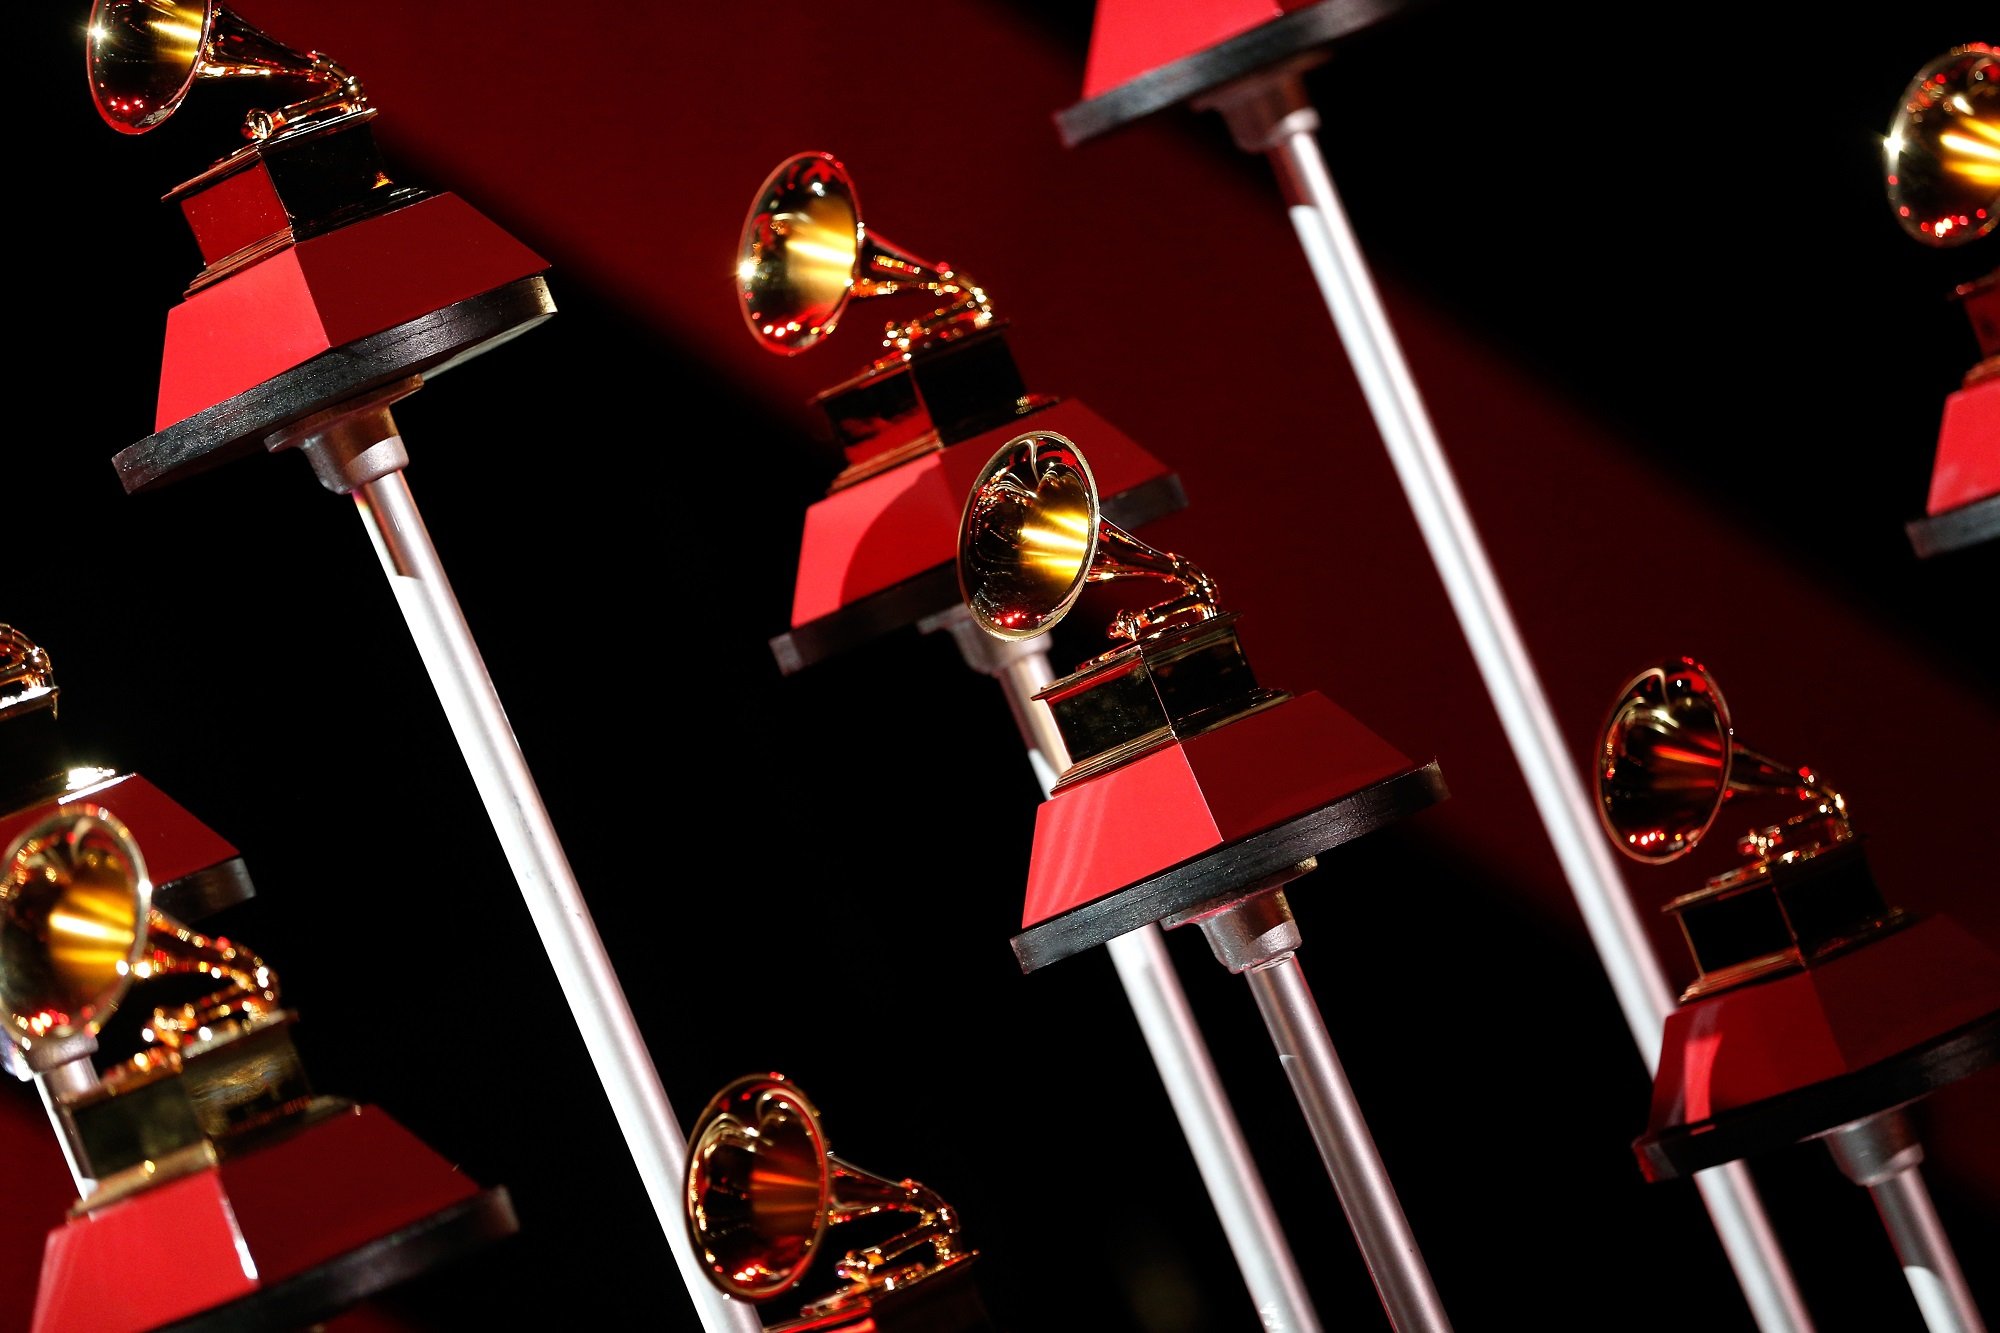 Multiple Latin Grammy award trophies on red pedestals